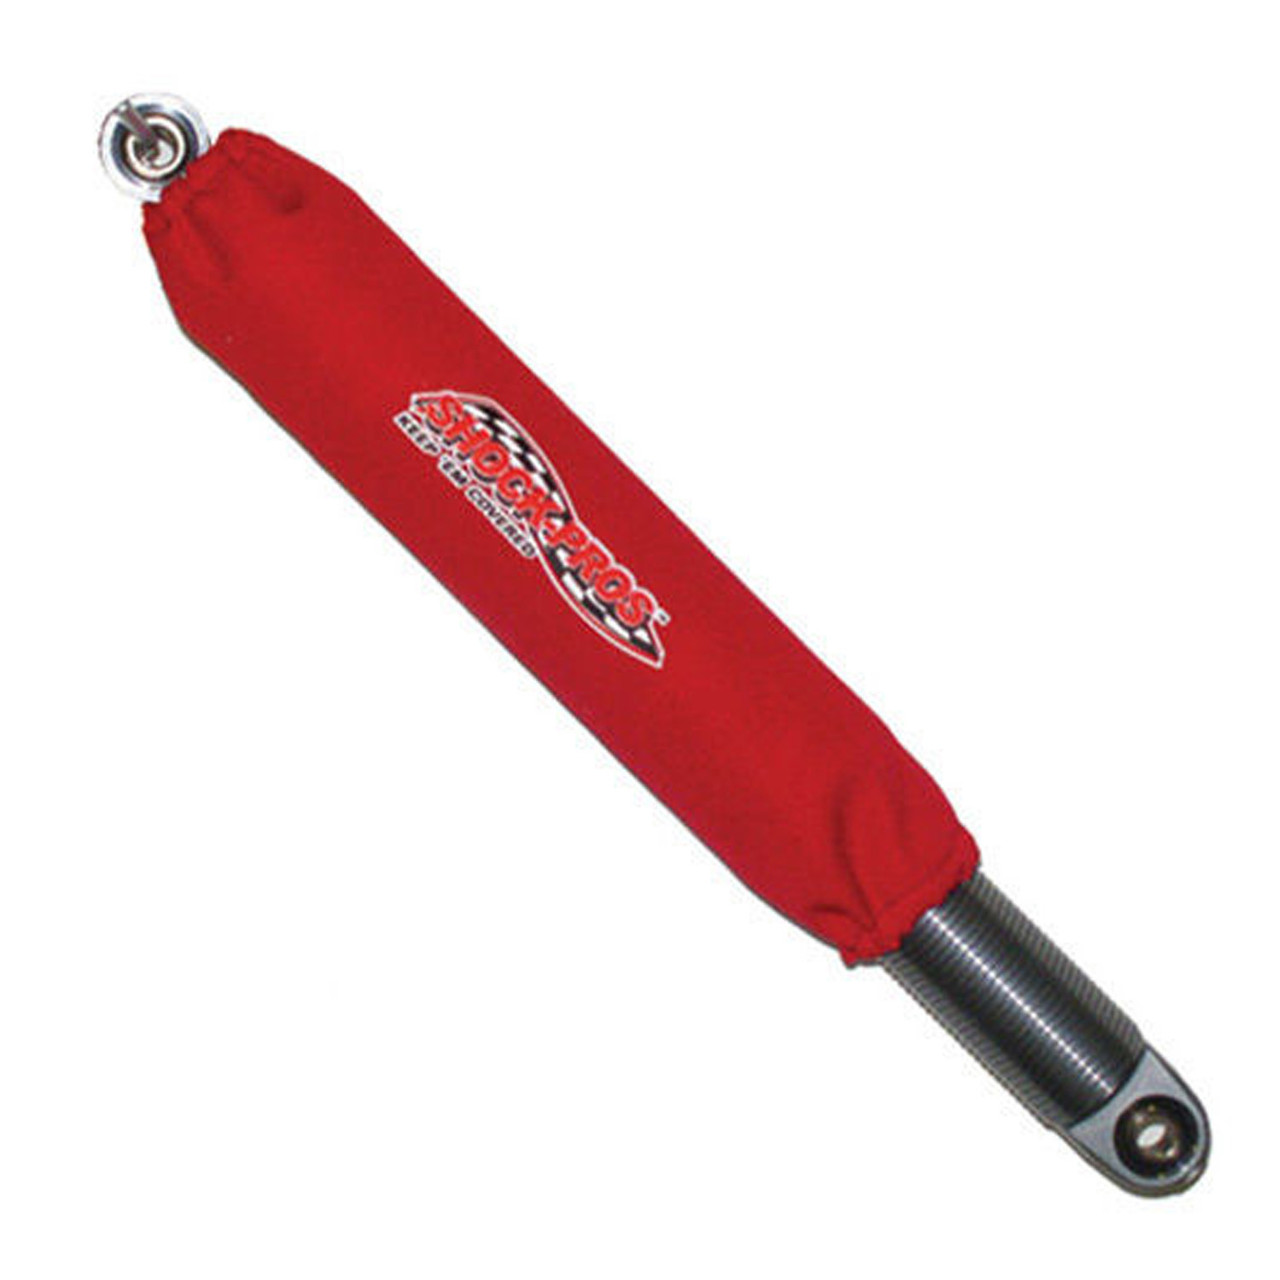 New ATV UTV Aftermarket Front Shock Covers, Red, 8932, A109RD